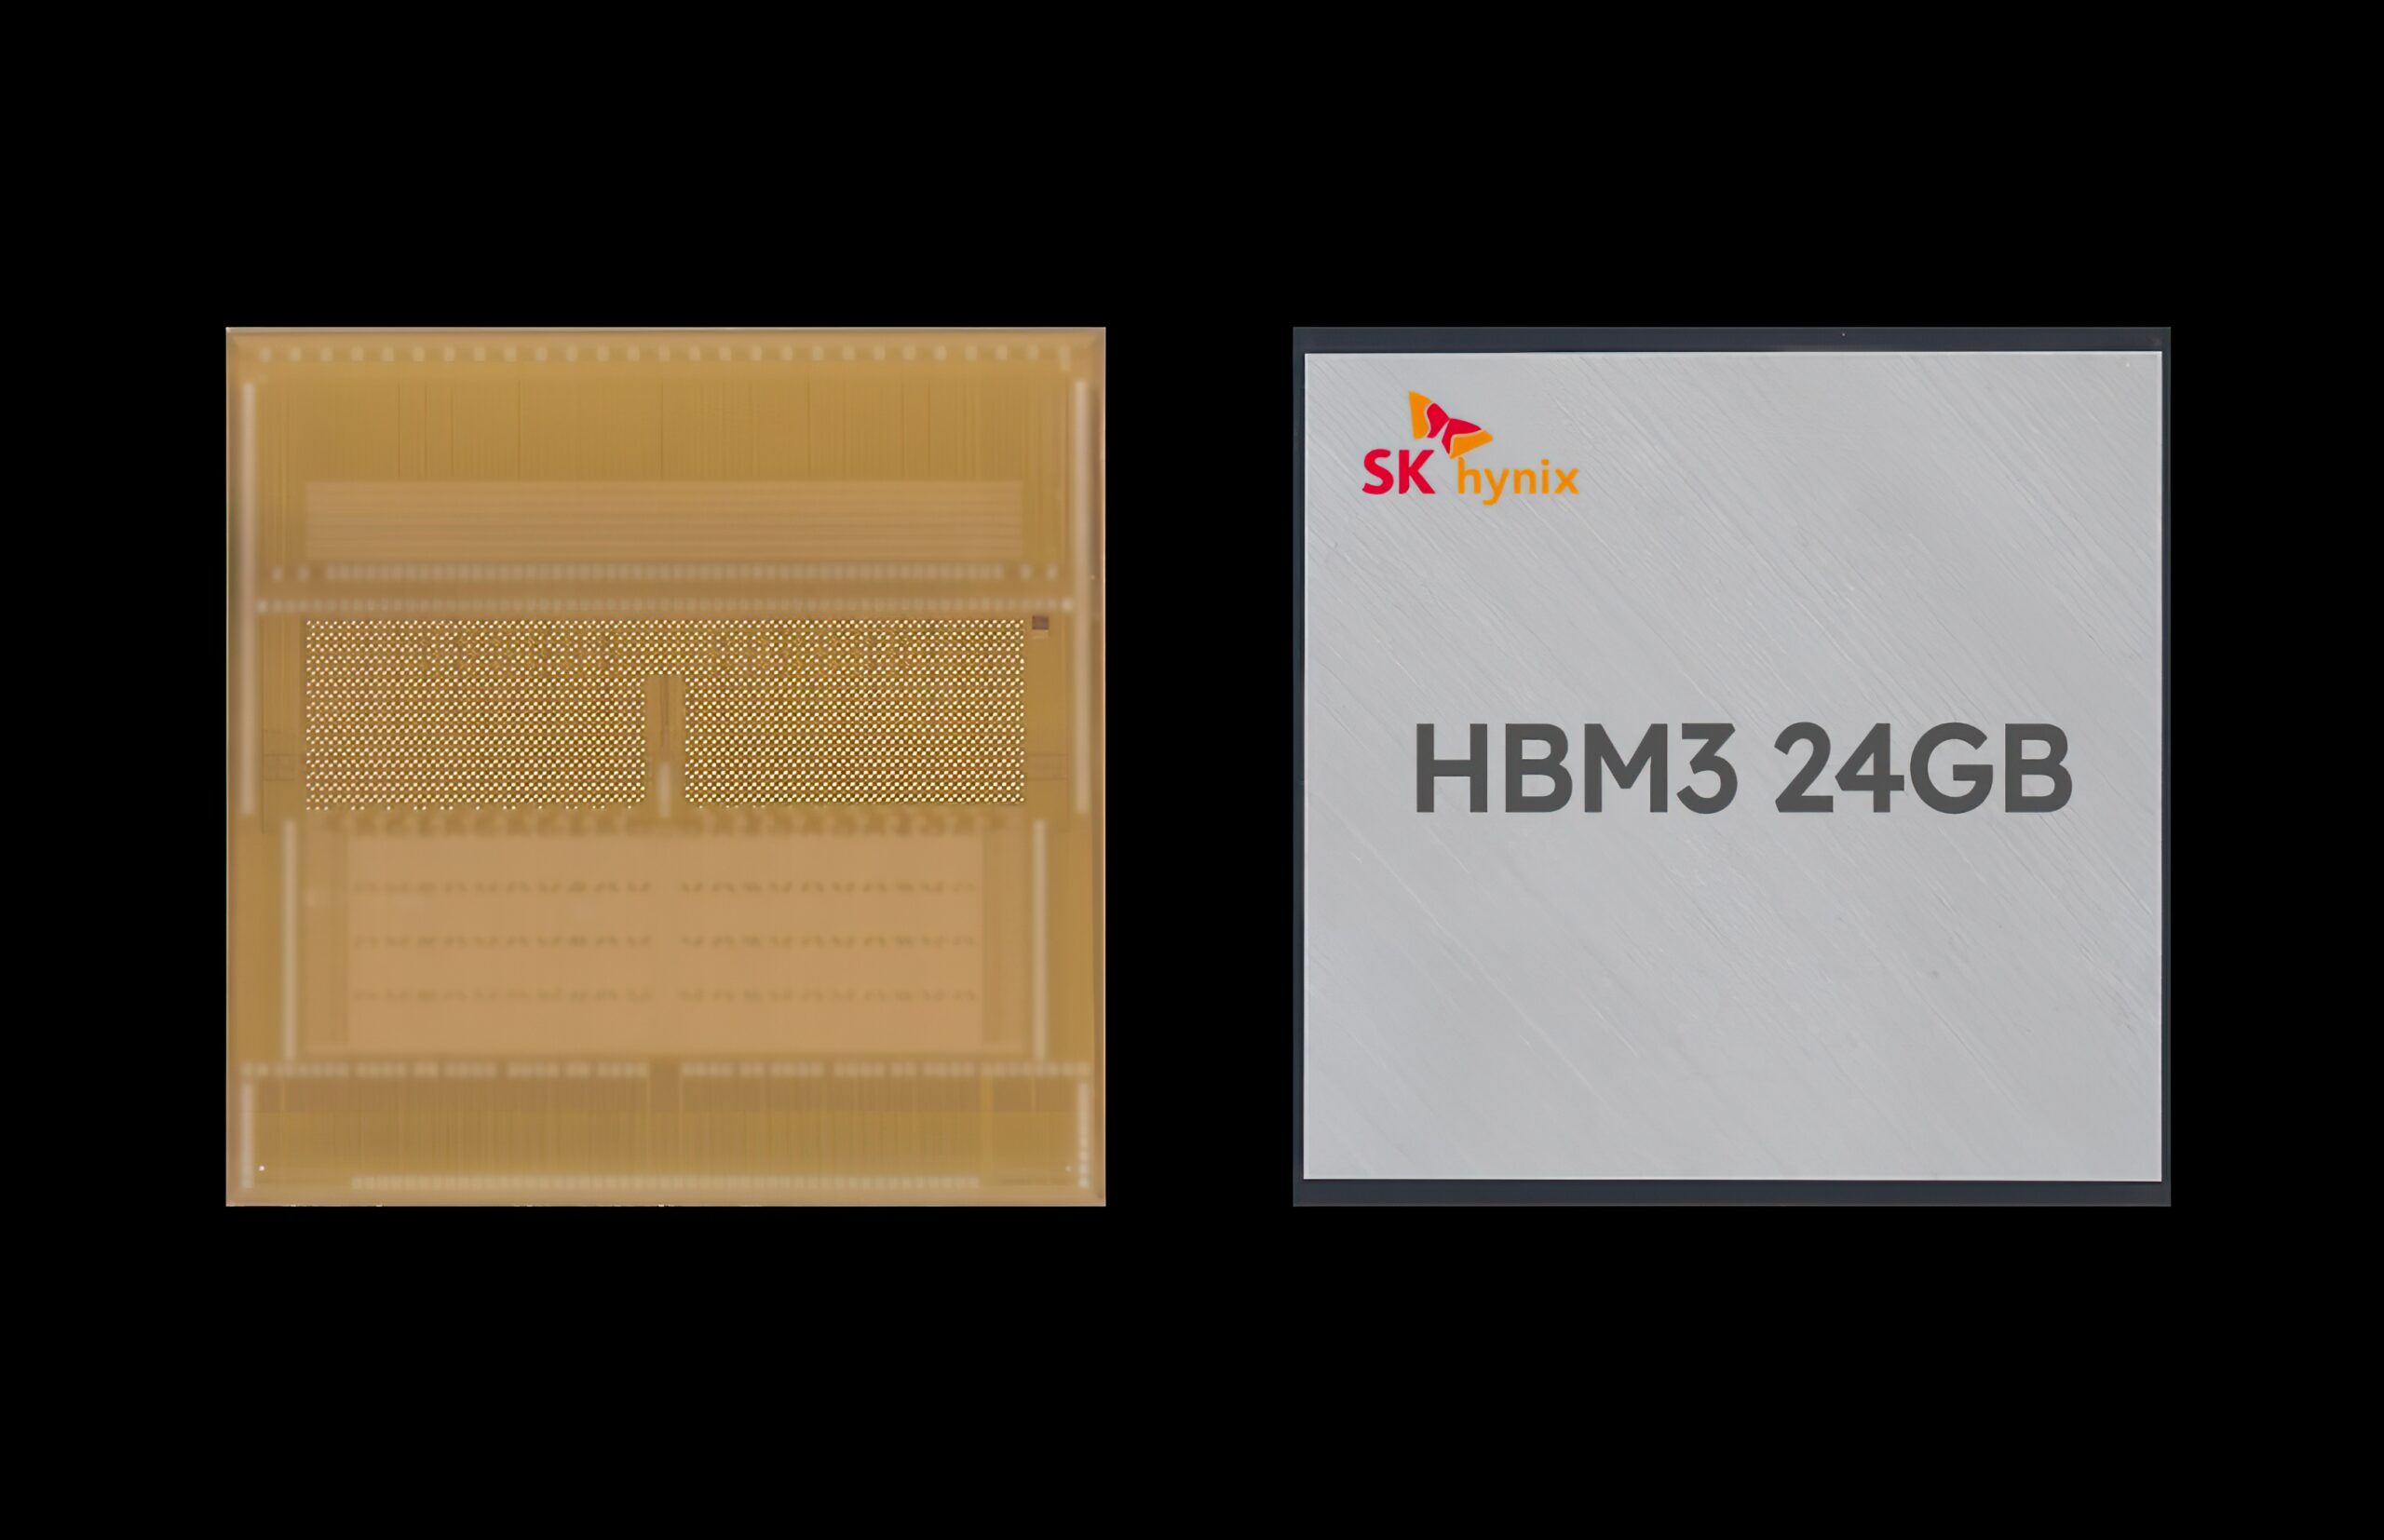 SK hynix First To Intro 12-Layer HBM3 Memory With 24 GB Capacity Per Stack, Sampling To Customers 1